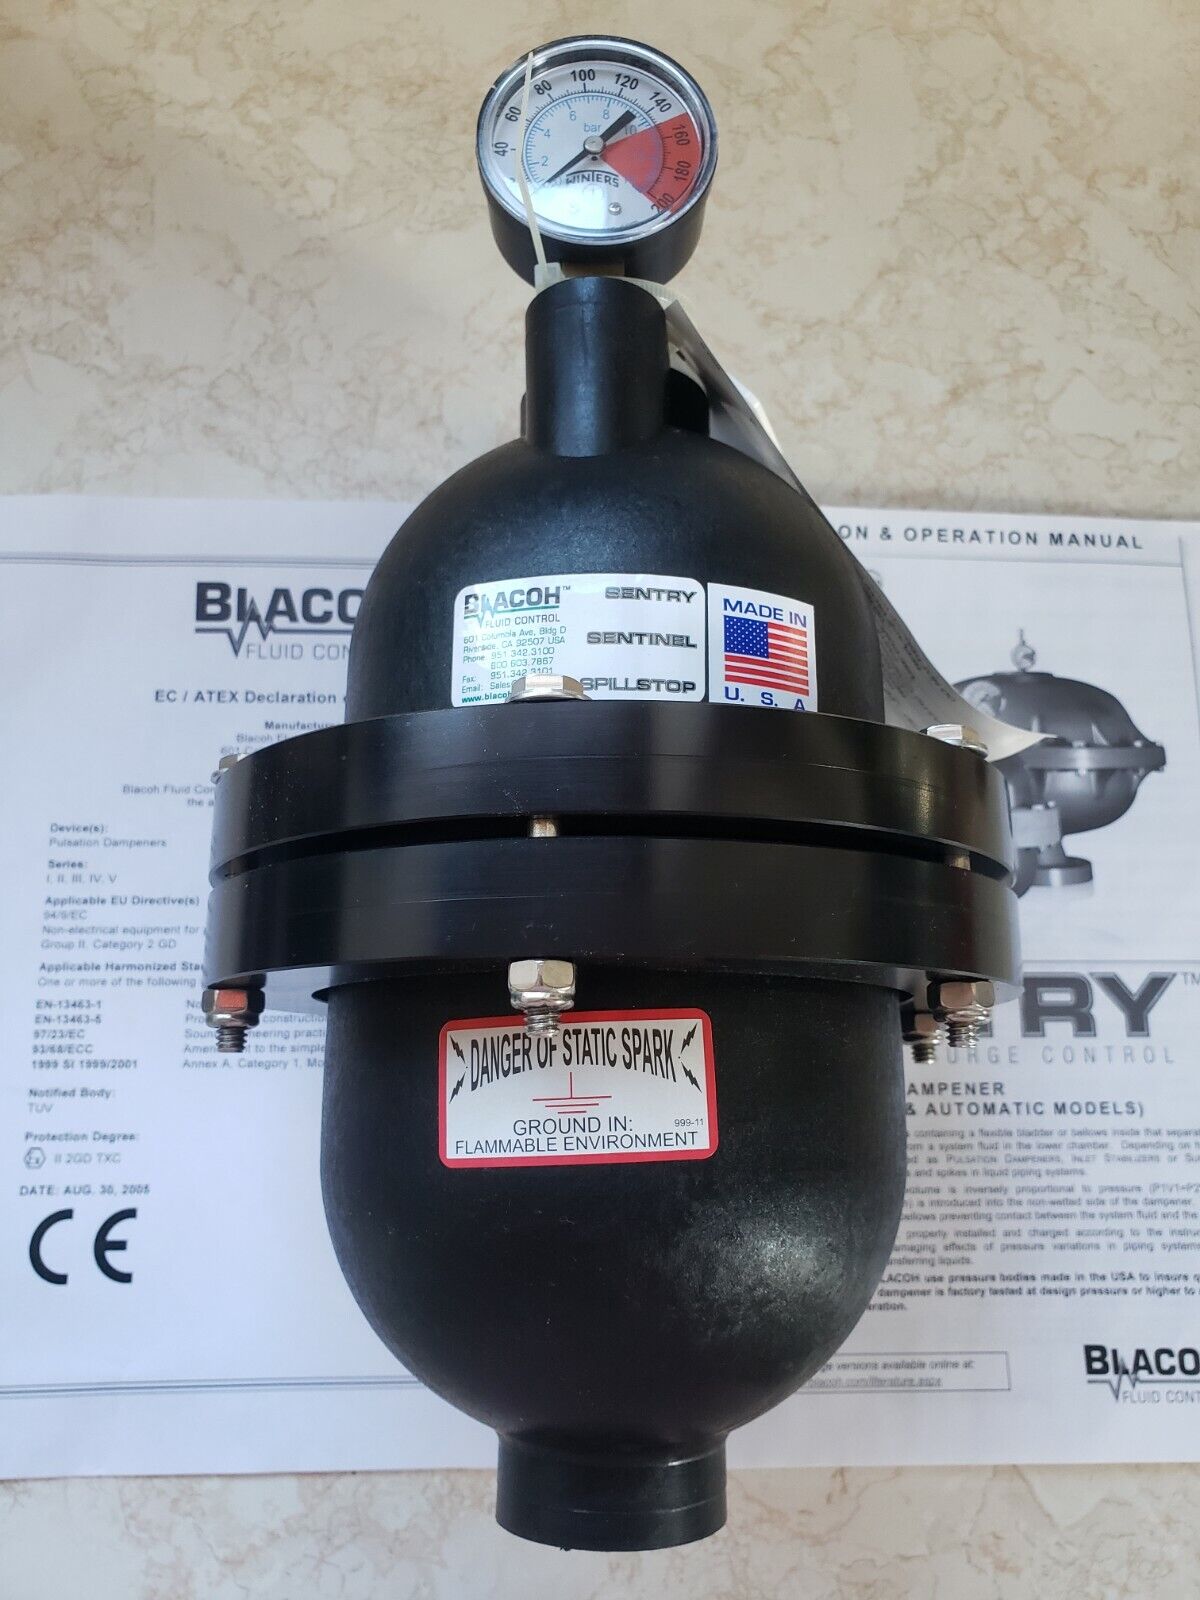 NEW Blacoh Fluid Control Sentry Pulsation Dampener A321TR-1-AT Sentinel 